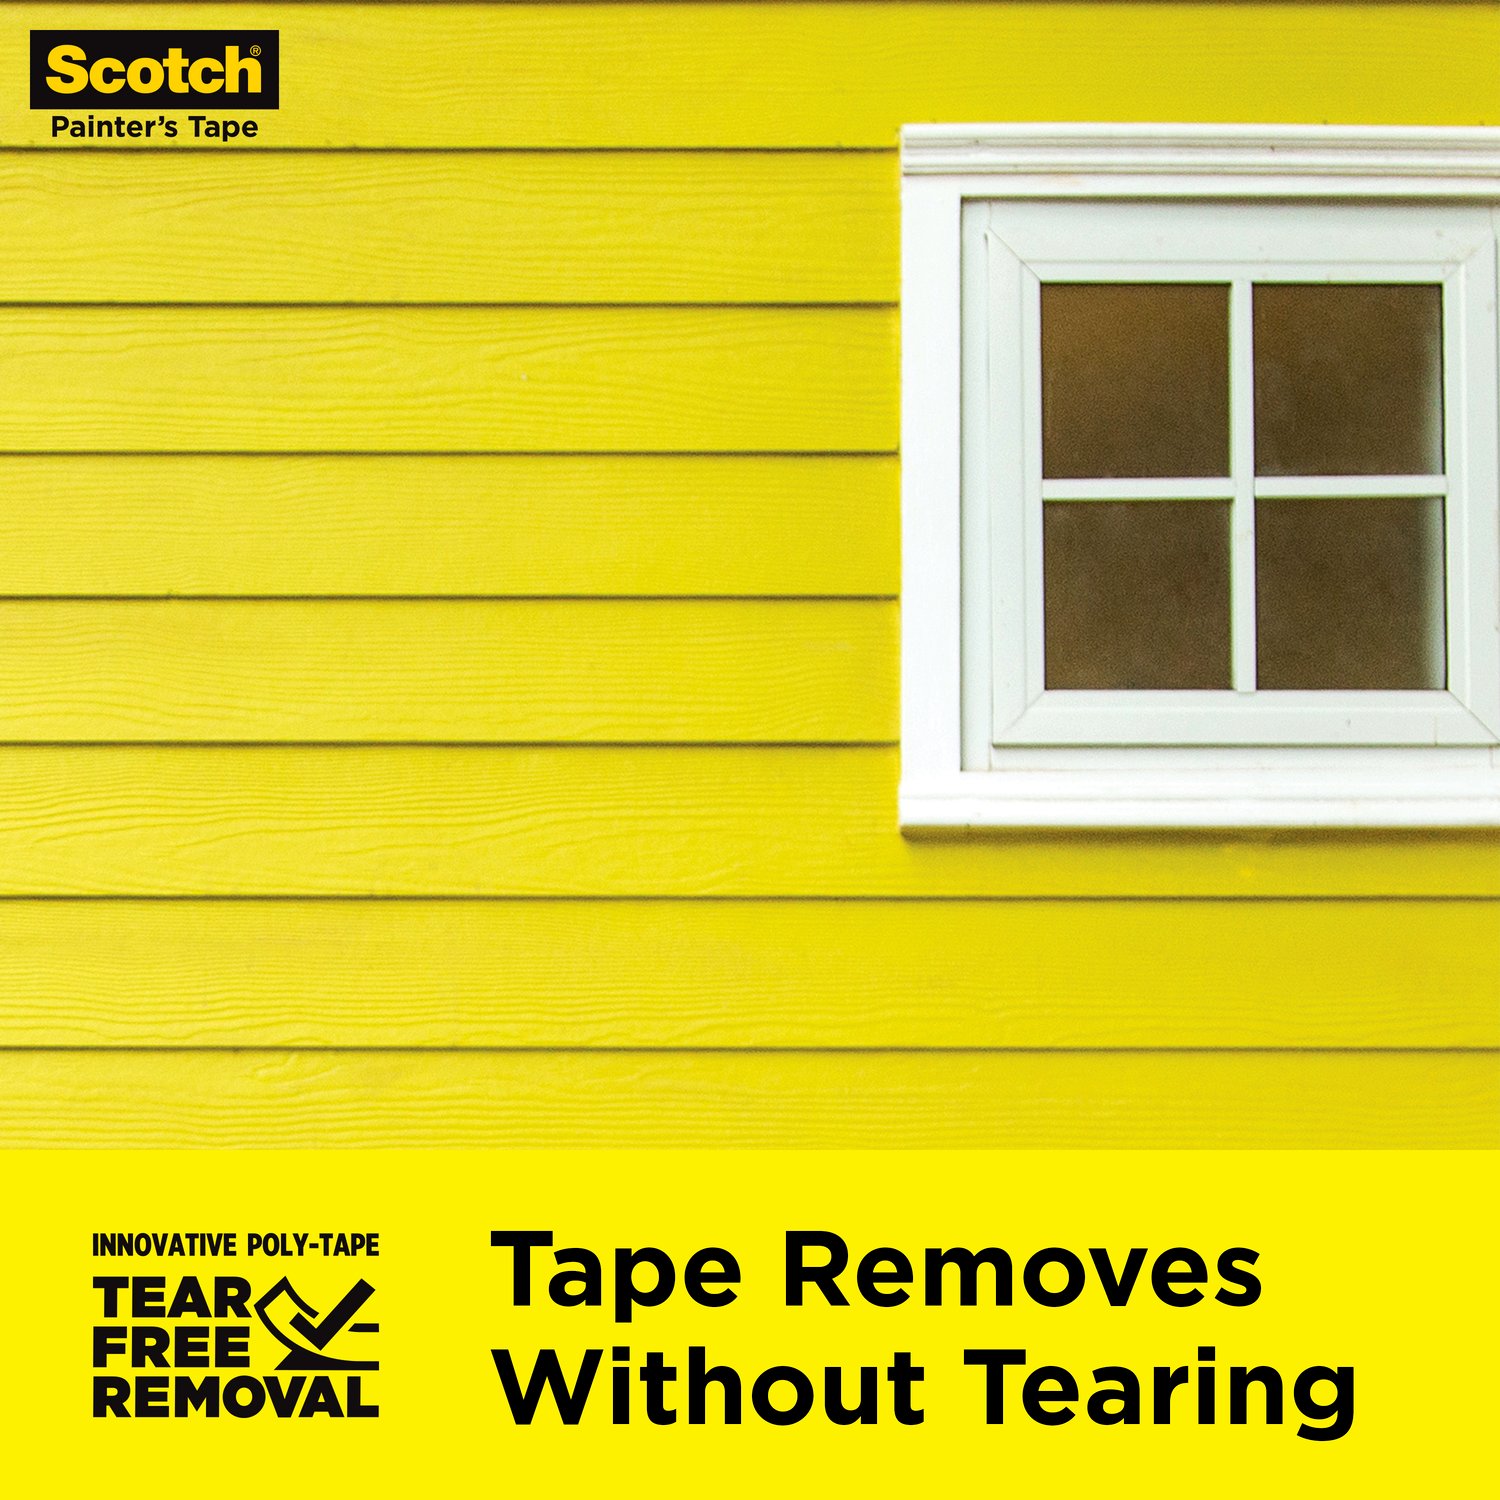 7100185554 - Scotch Exterior Surface Painter's Tape 2097-36EC-XS, 1.41 in x 45 yd
(36mm x 41,1m)